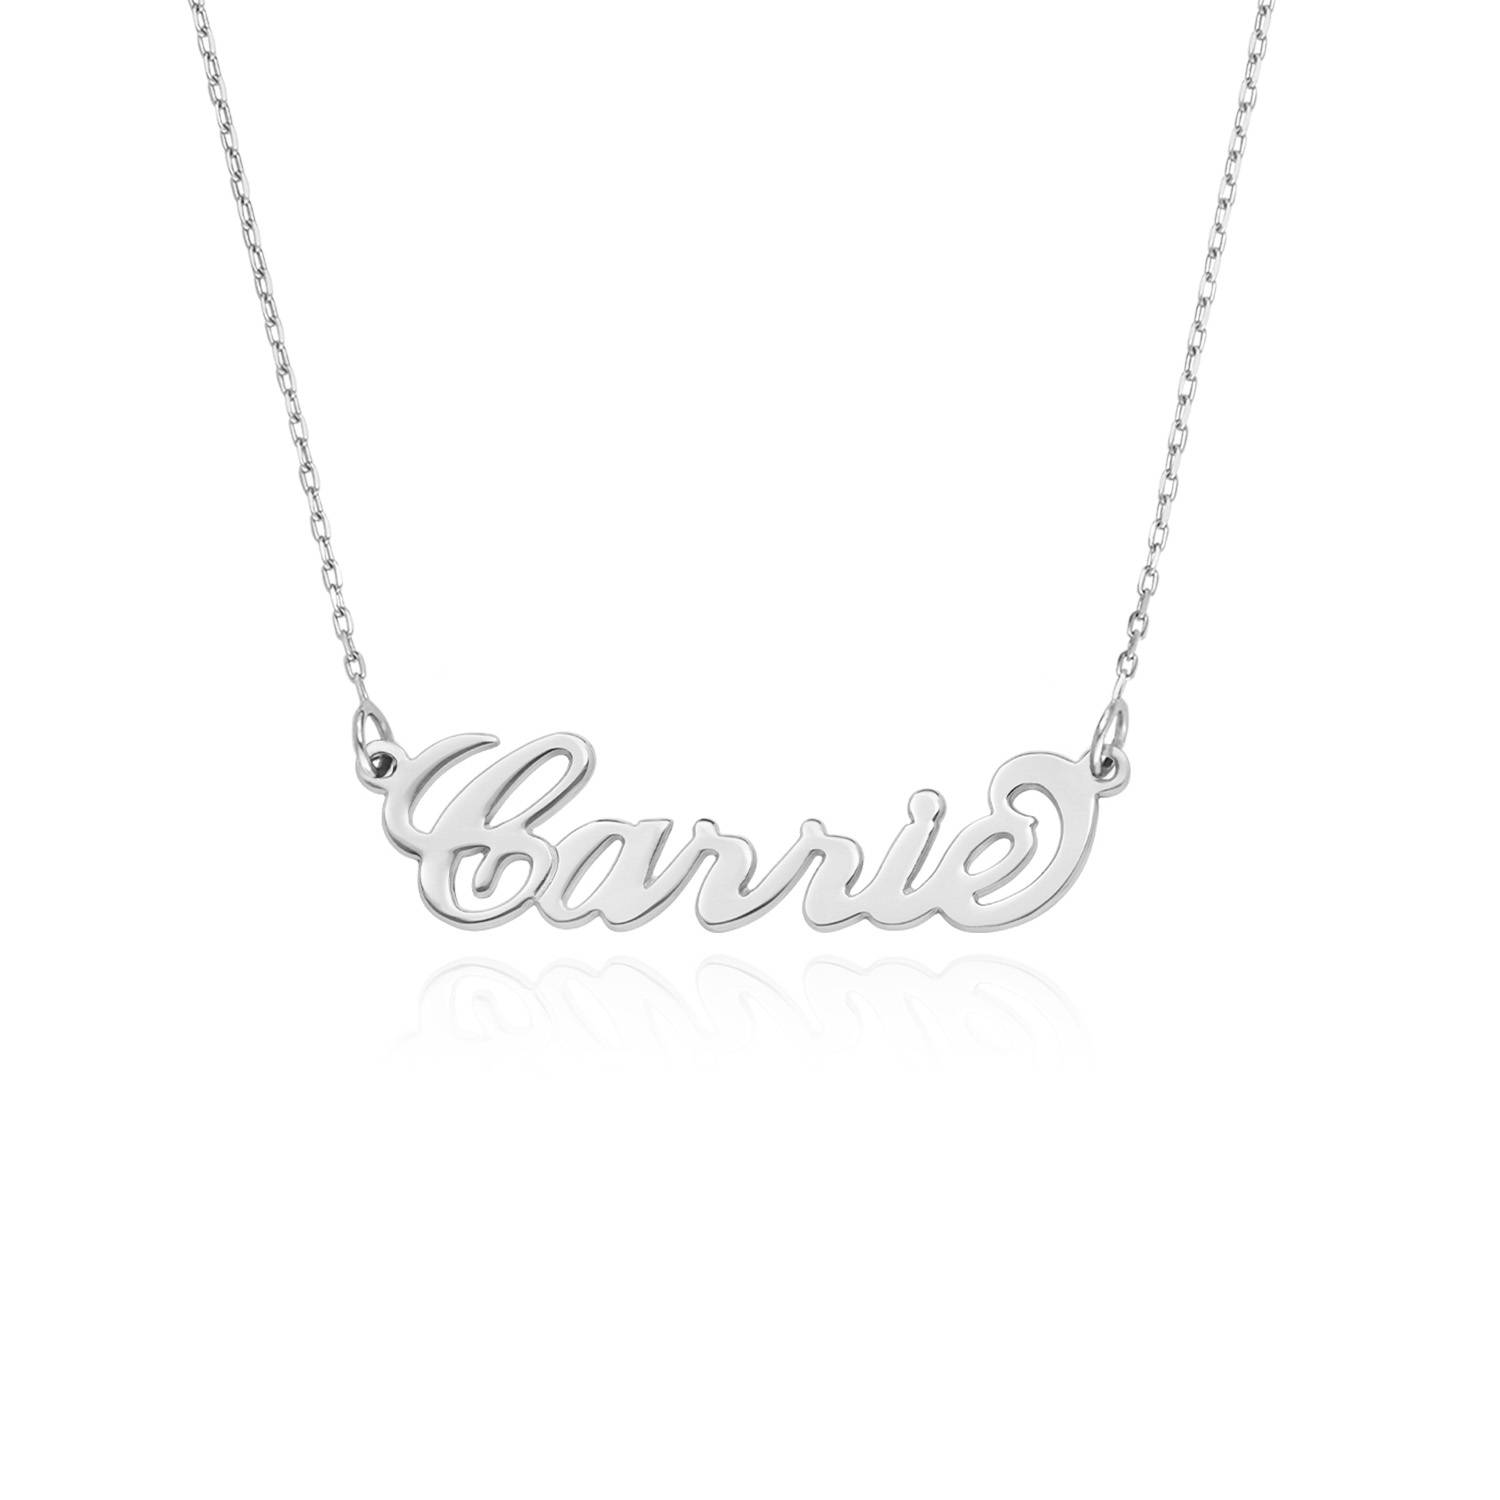 14k Wit Goud "Carrie" Stijl Naam Ketting-2 Productfoto